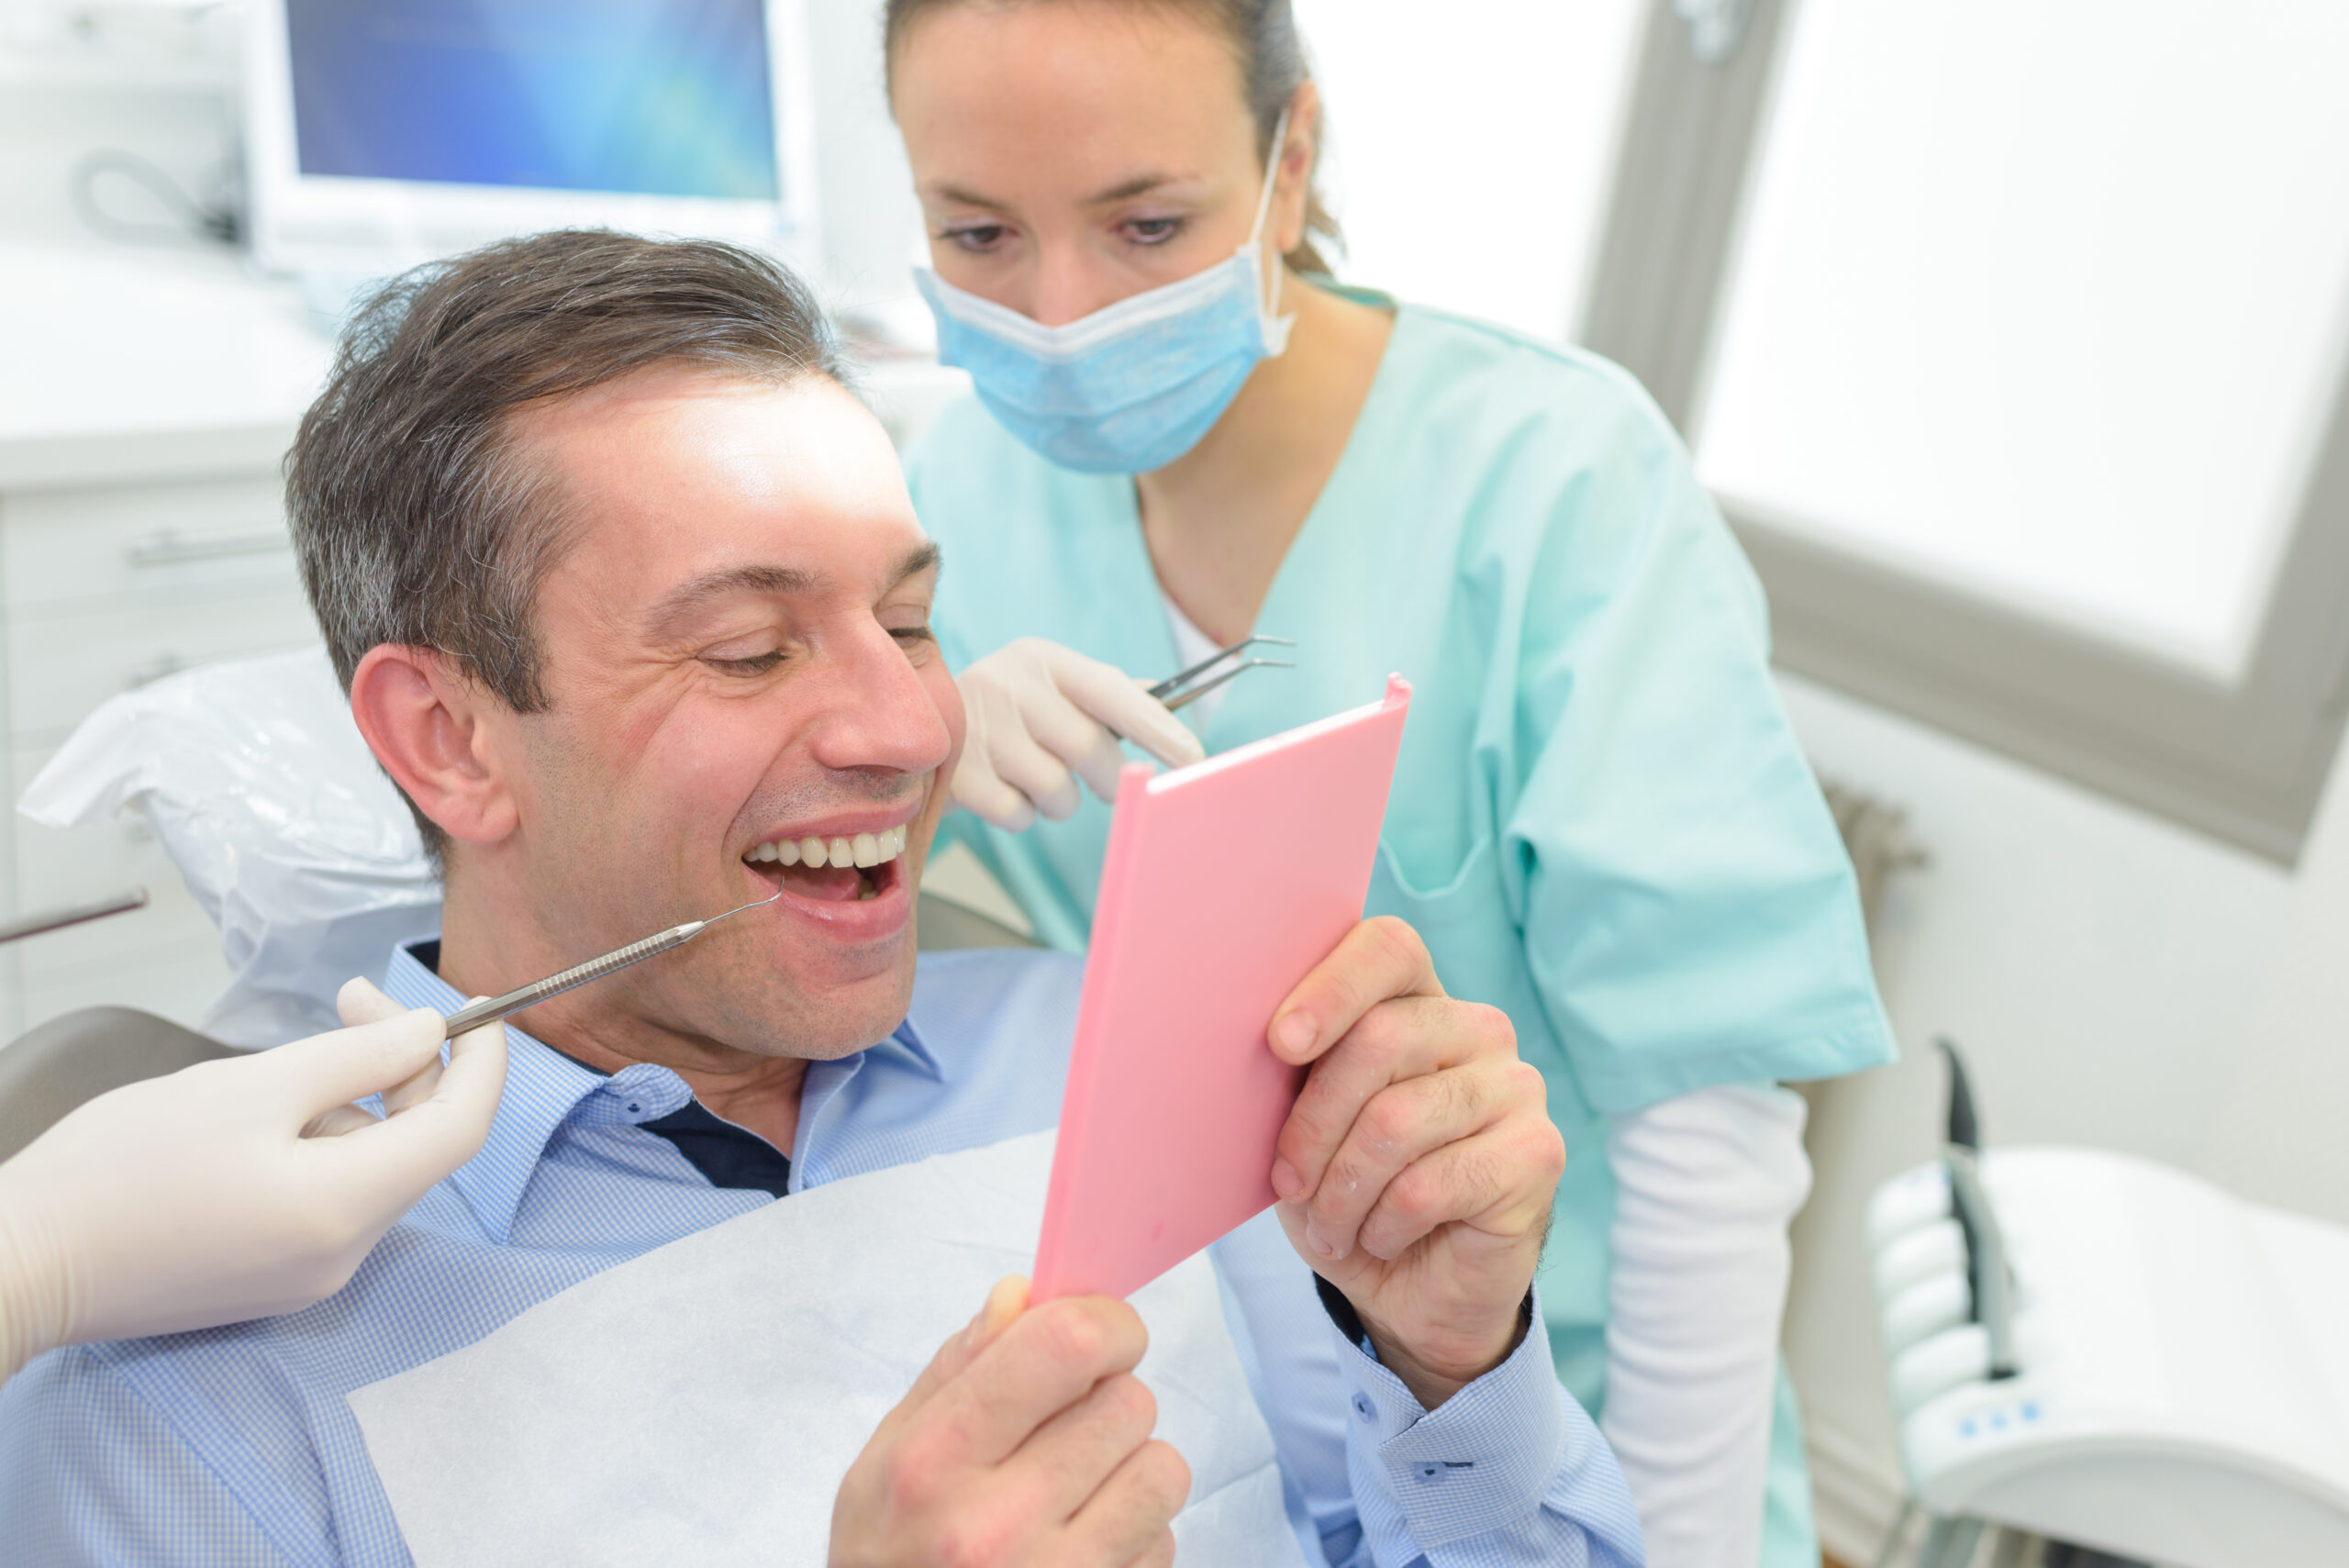 Finding a Dental Bridge Specialist: Guidance on How to Select a Reputable and Experienced Dental Bridge Specialist in Downtown San Diego